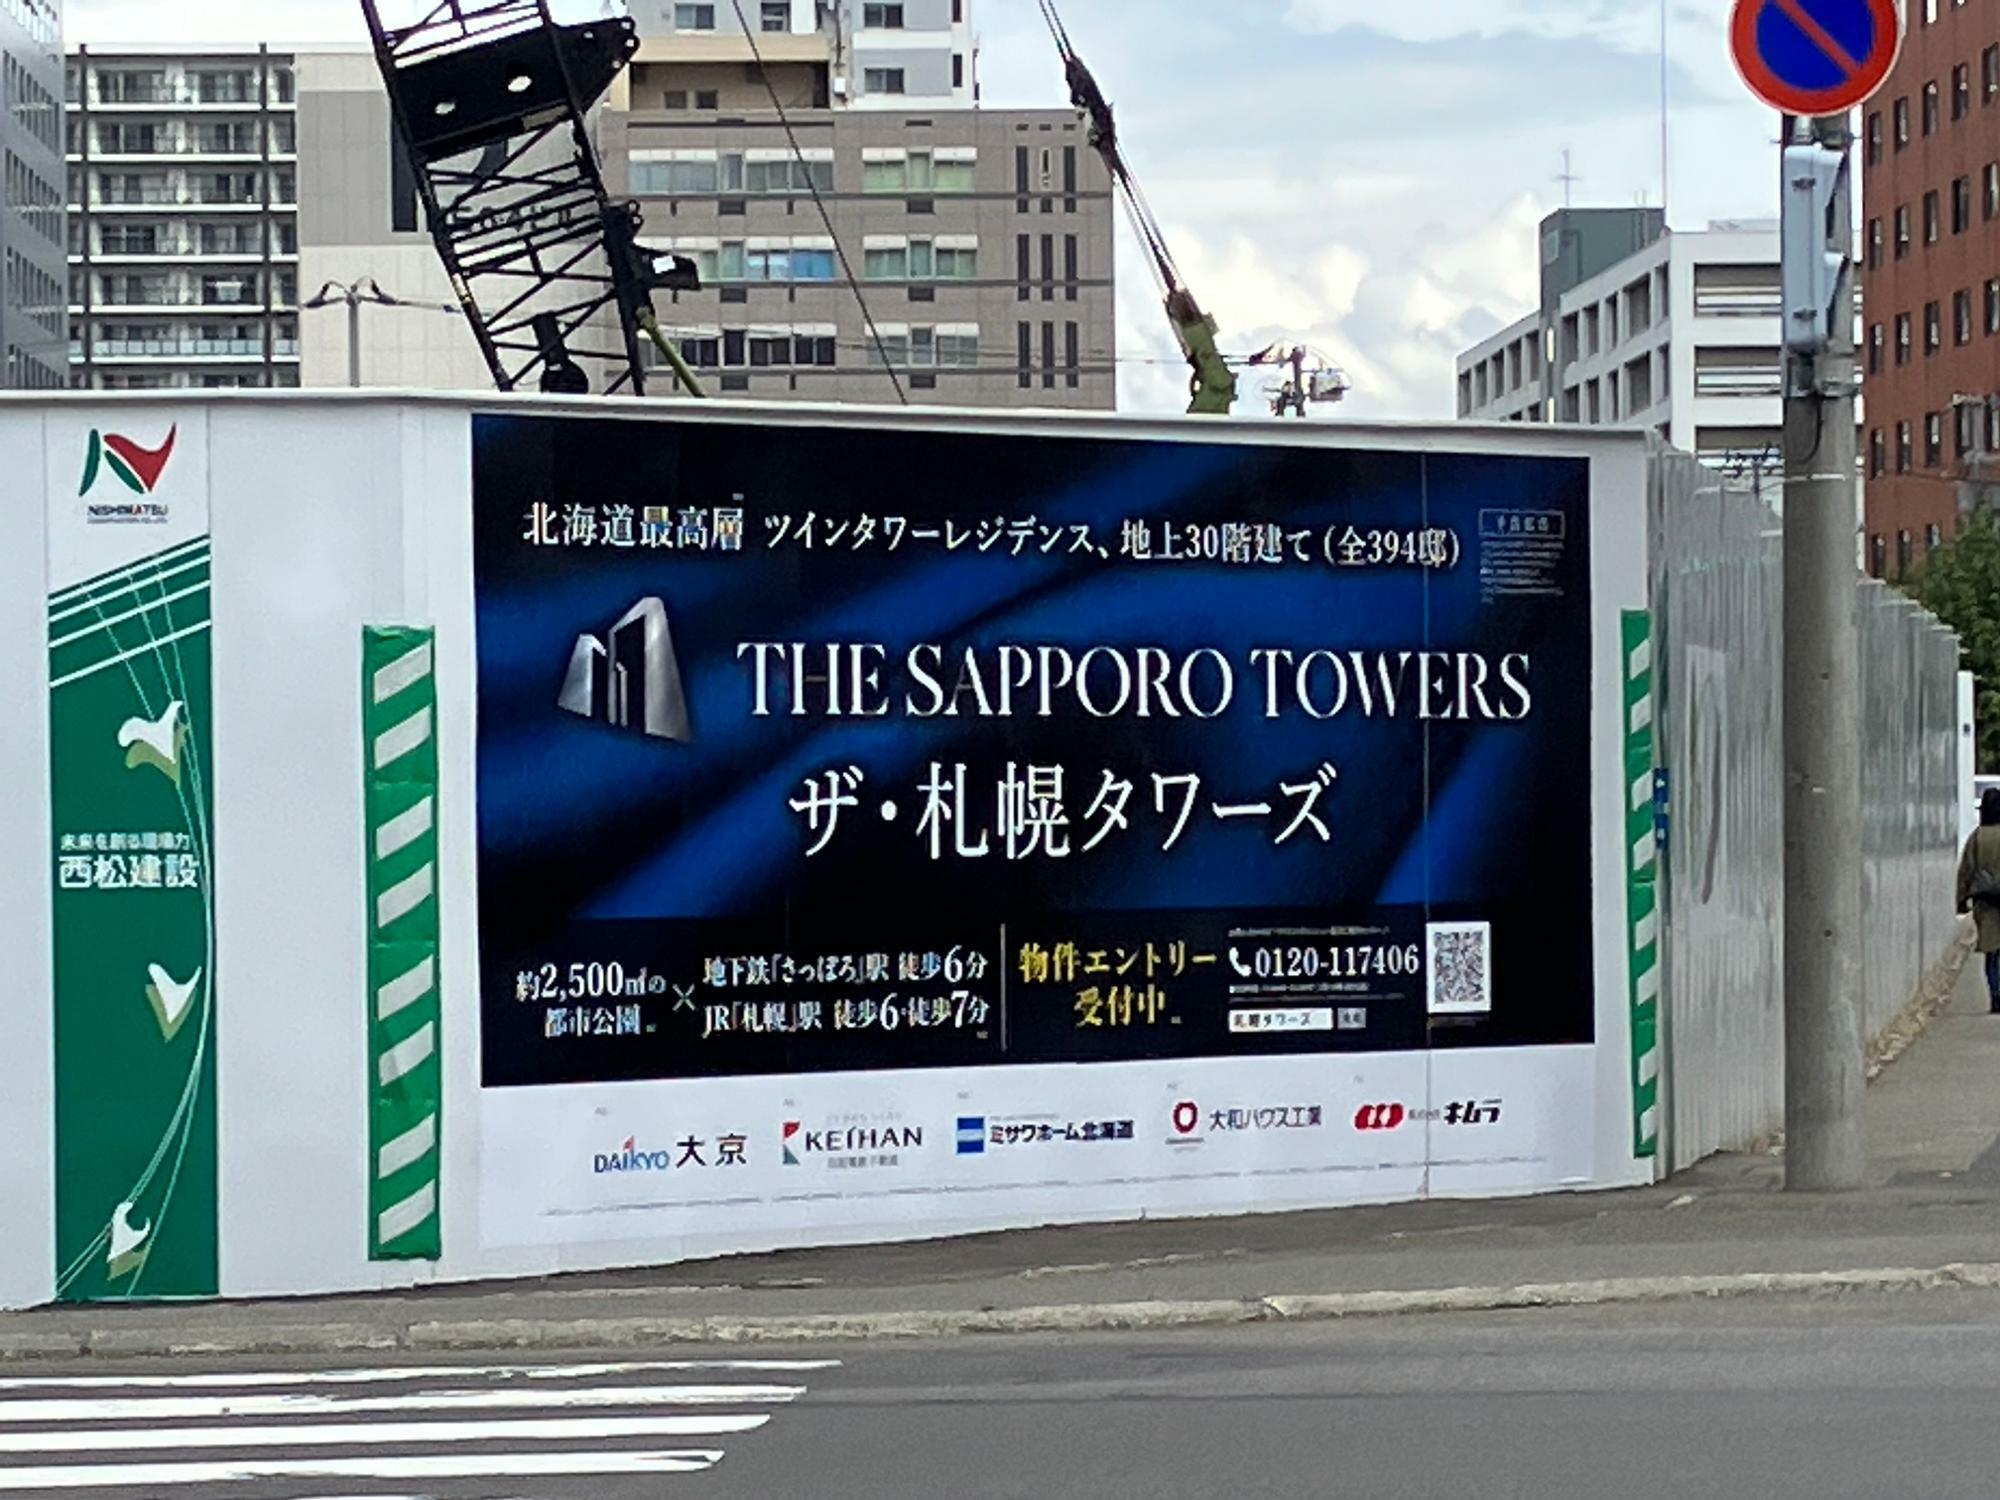 THE SAPPORO TOWERS